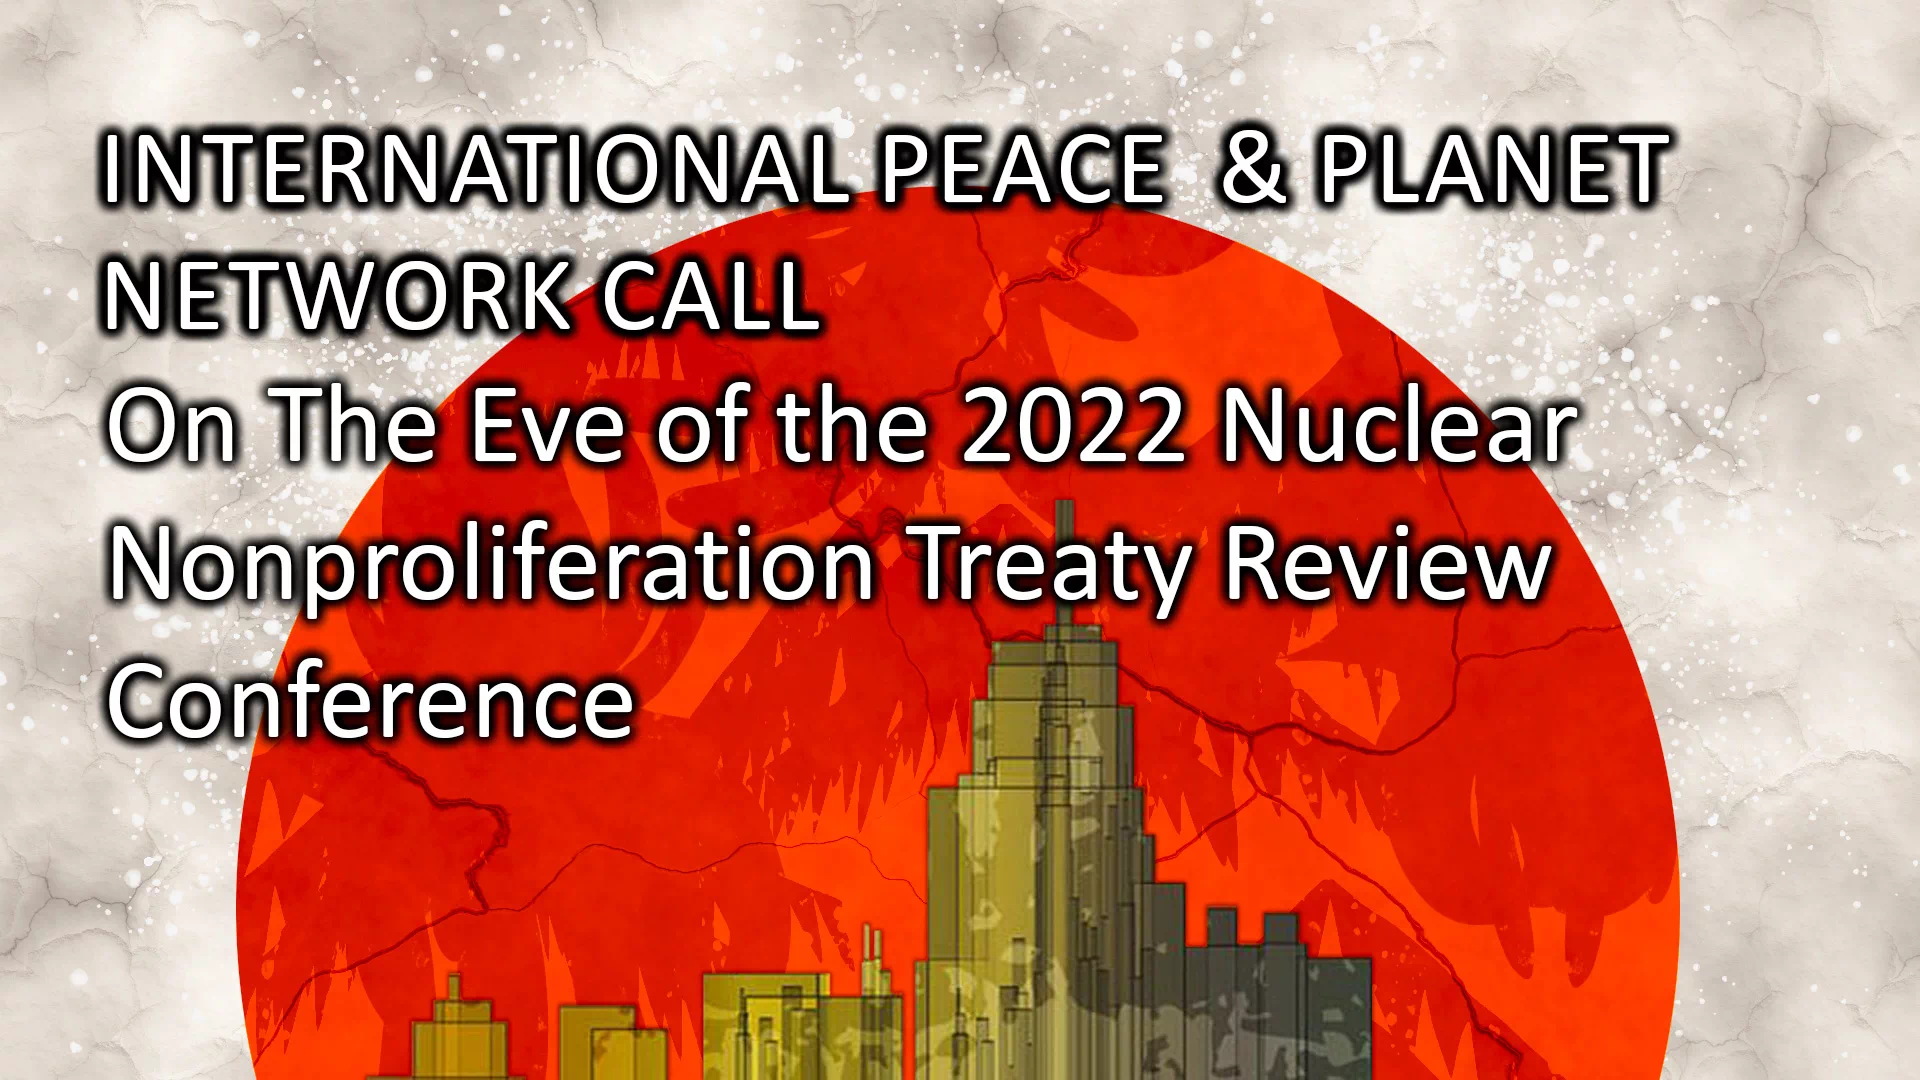 International Peace & Planet Network Call. On The Eve of the 2022 Nuclear Nonproliferation Treaty Review Conference